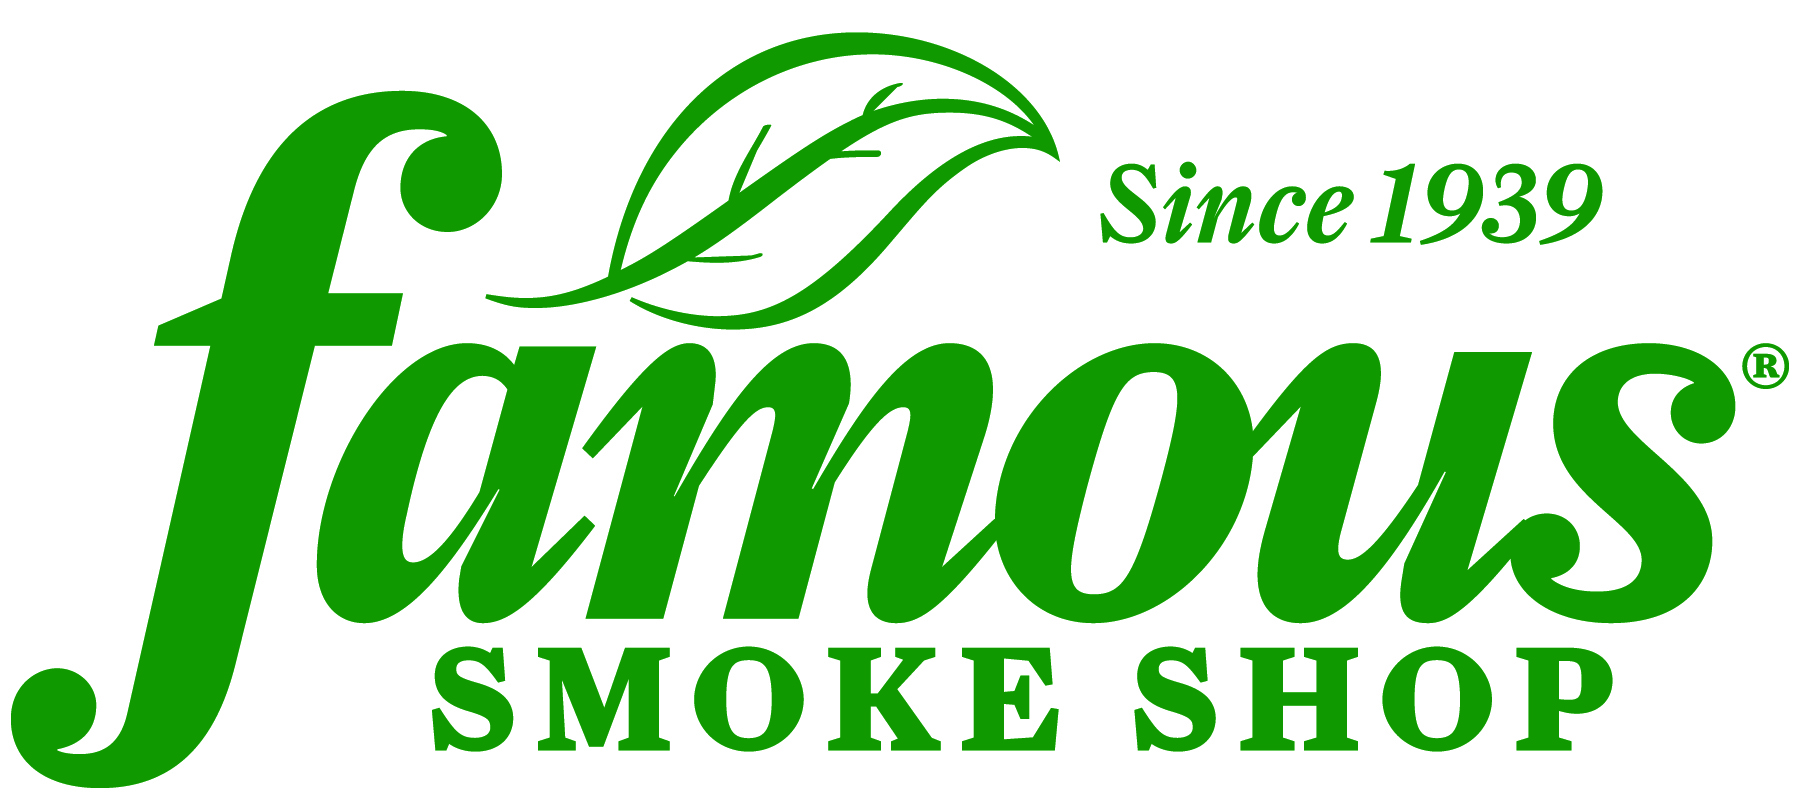 Famous Smoke Shop - the Leading Source for Discount Online Cigar Shopping